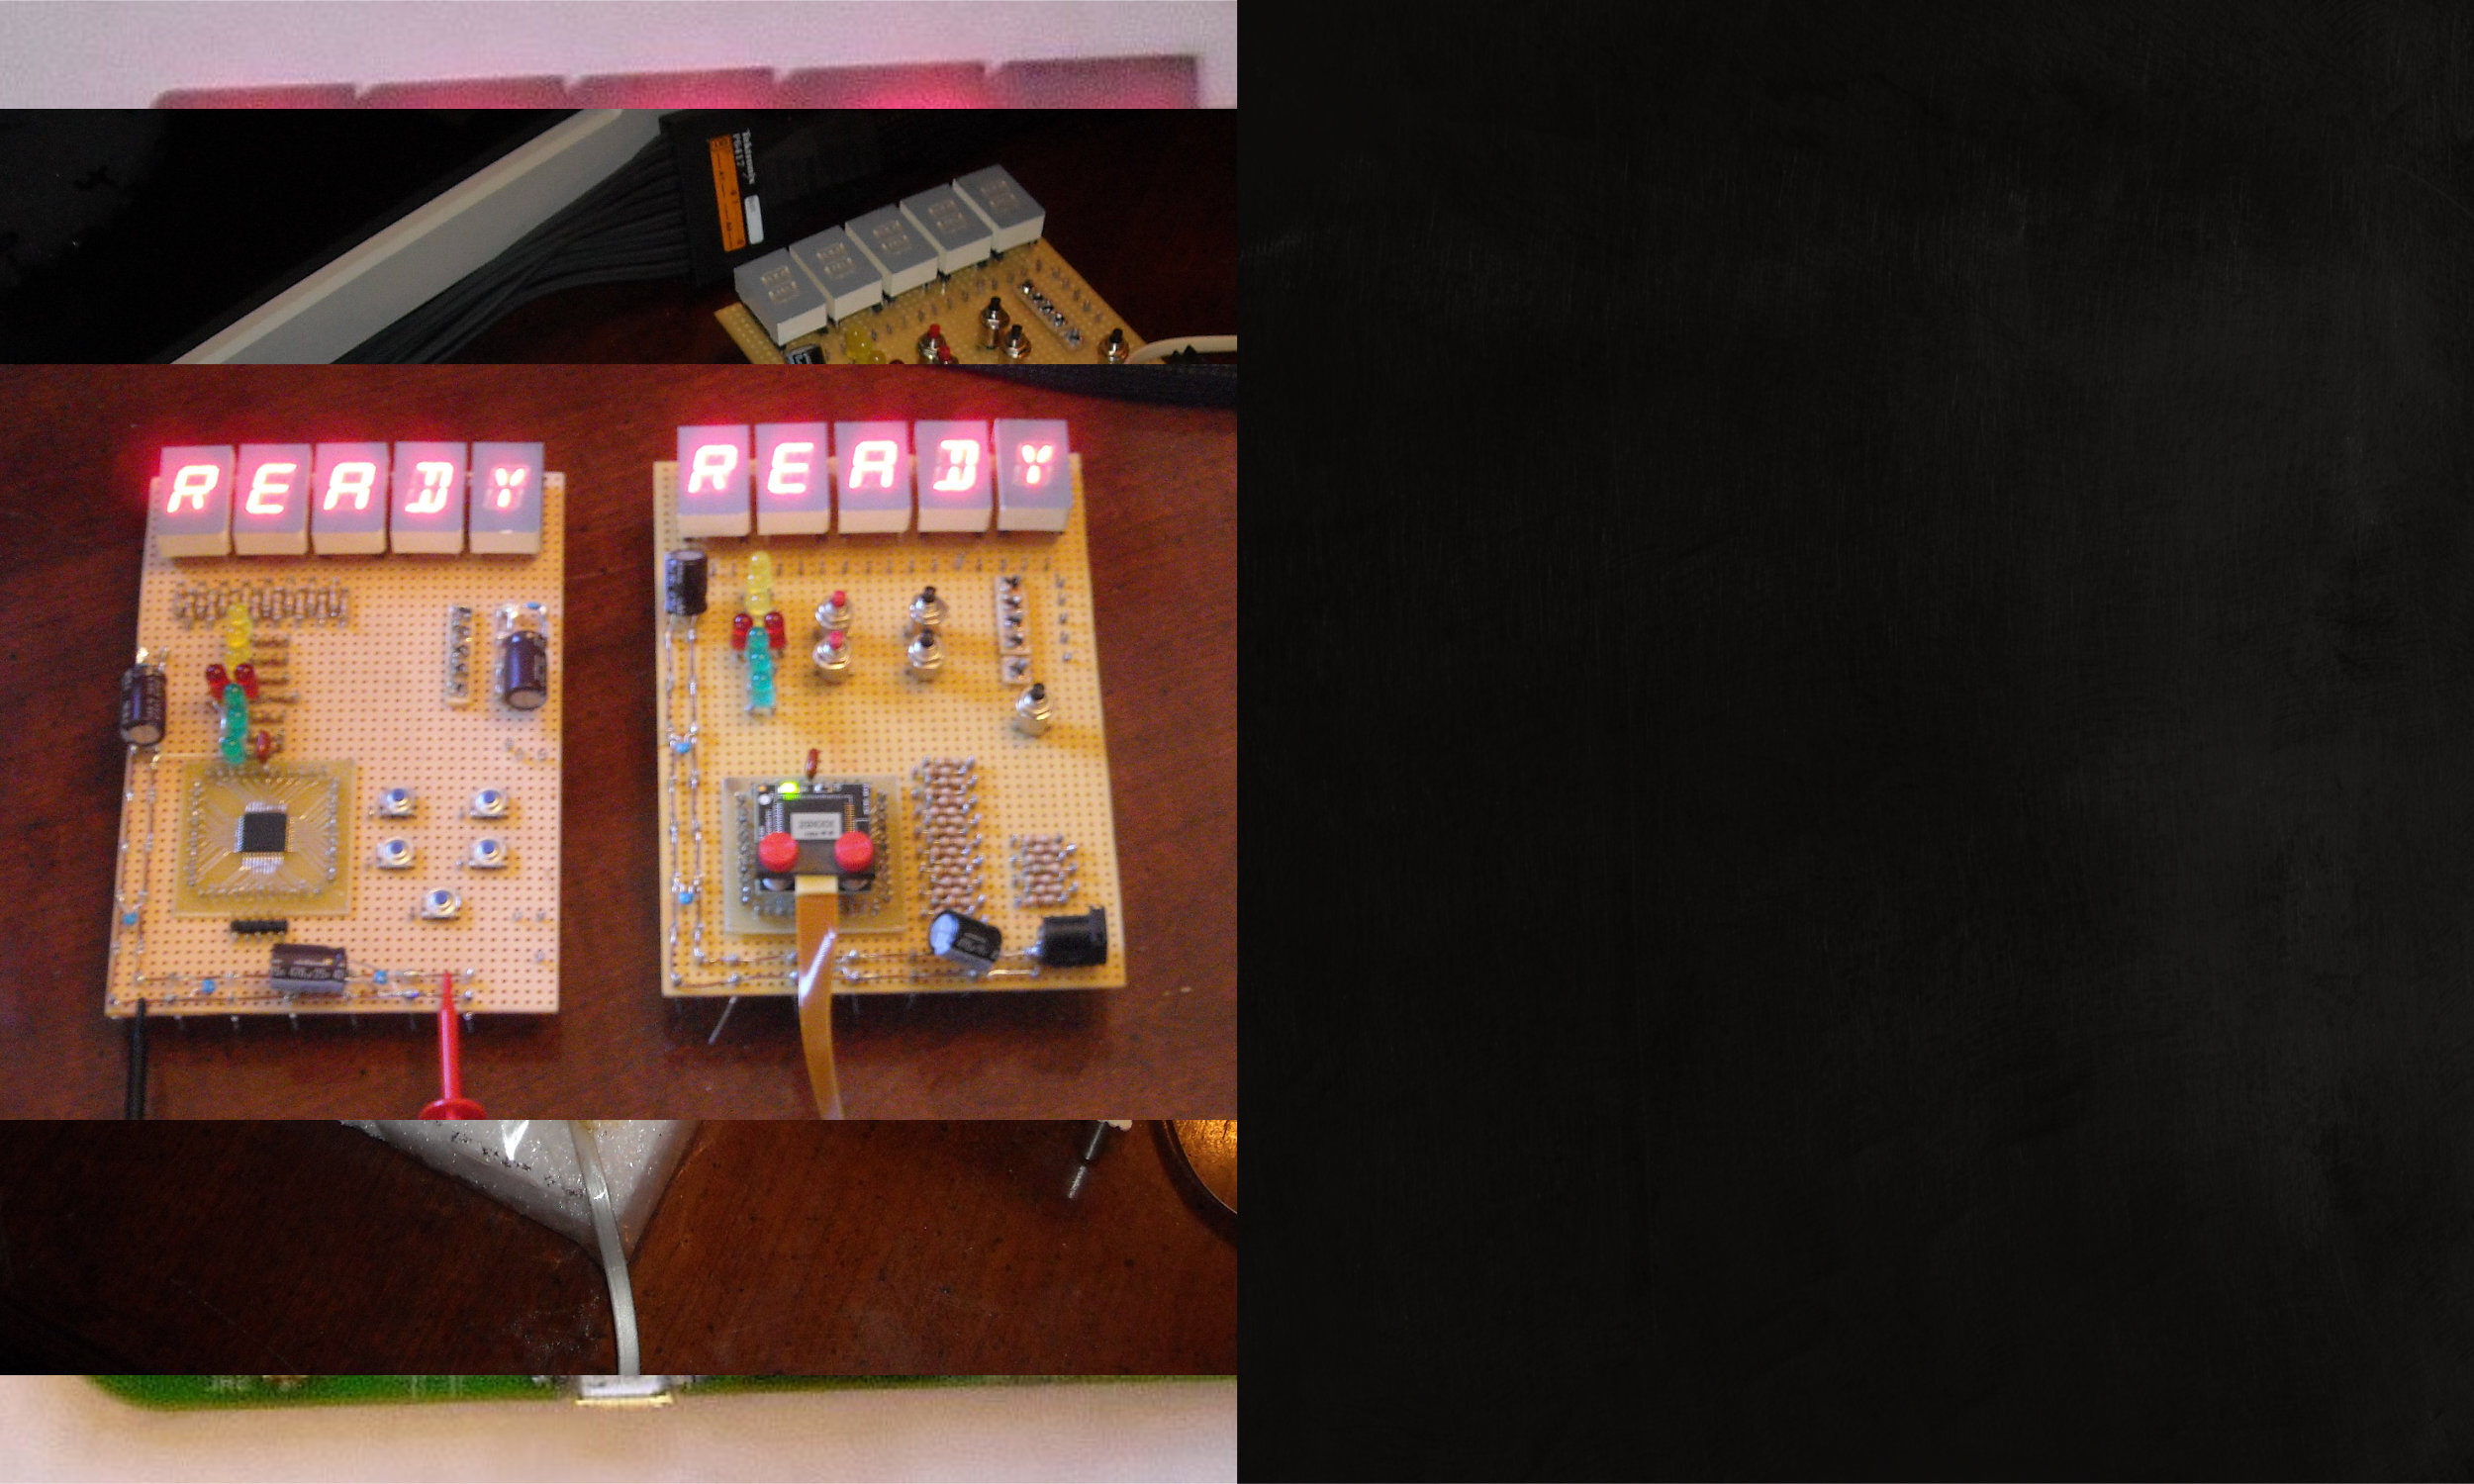  On one mockup (the one on the left here), we soldered an actual microprocessor chip. To the other (the one on the right here), we attached an in-circuit emulator so we could run software from a host PC and see how the system behaved. 